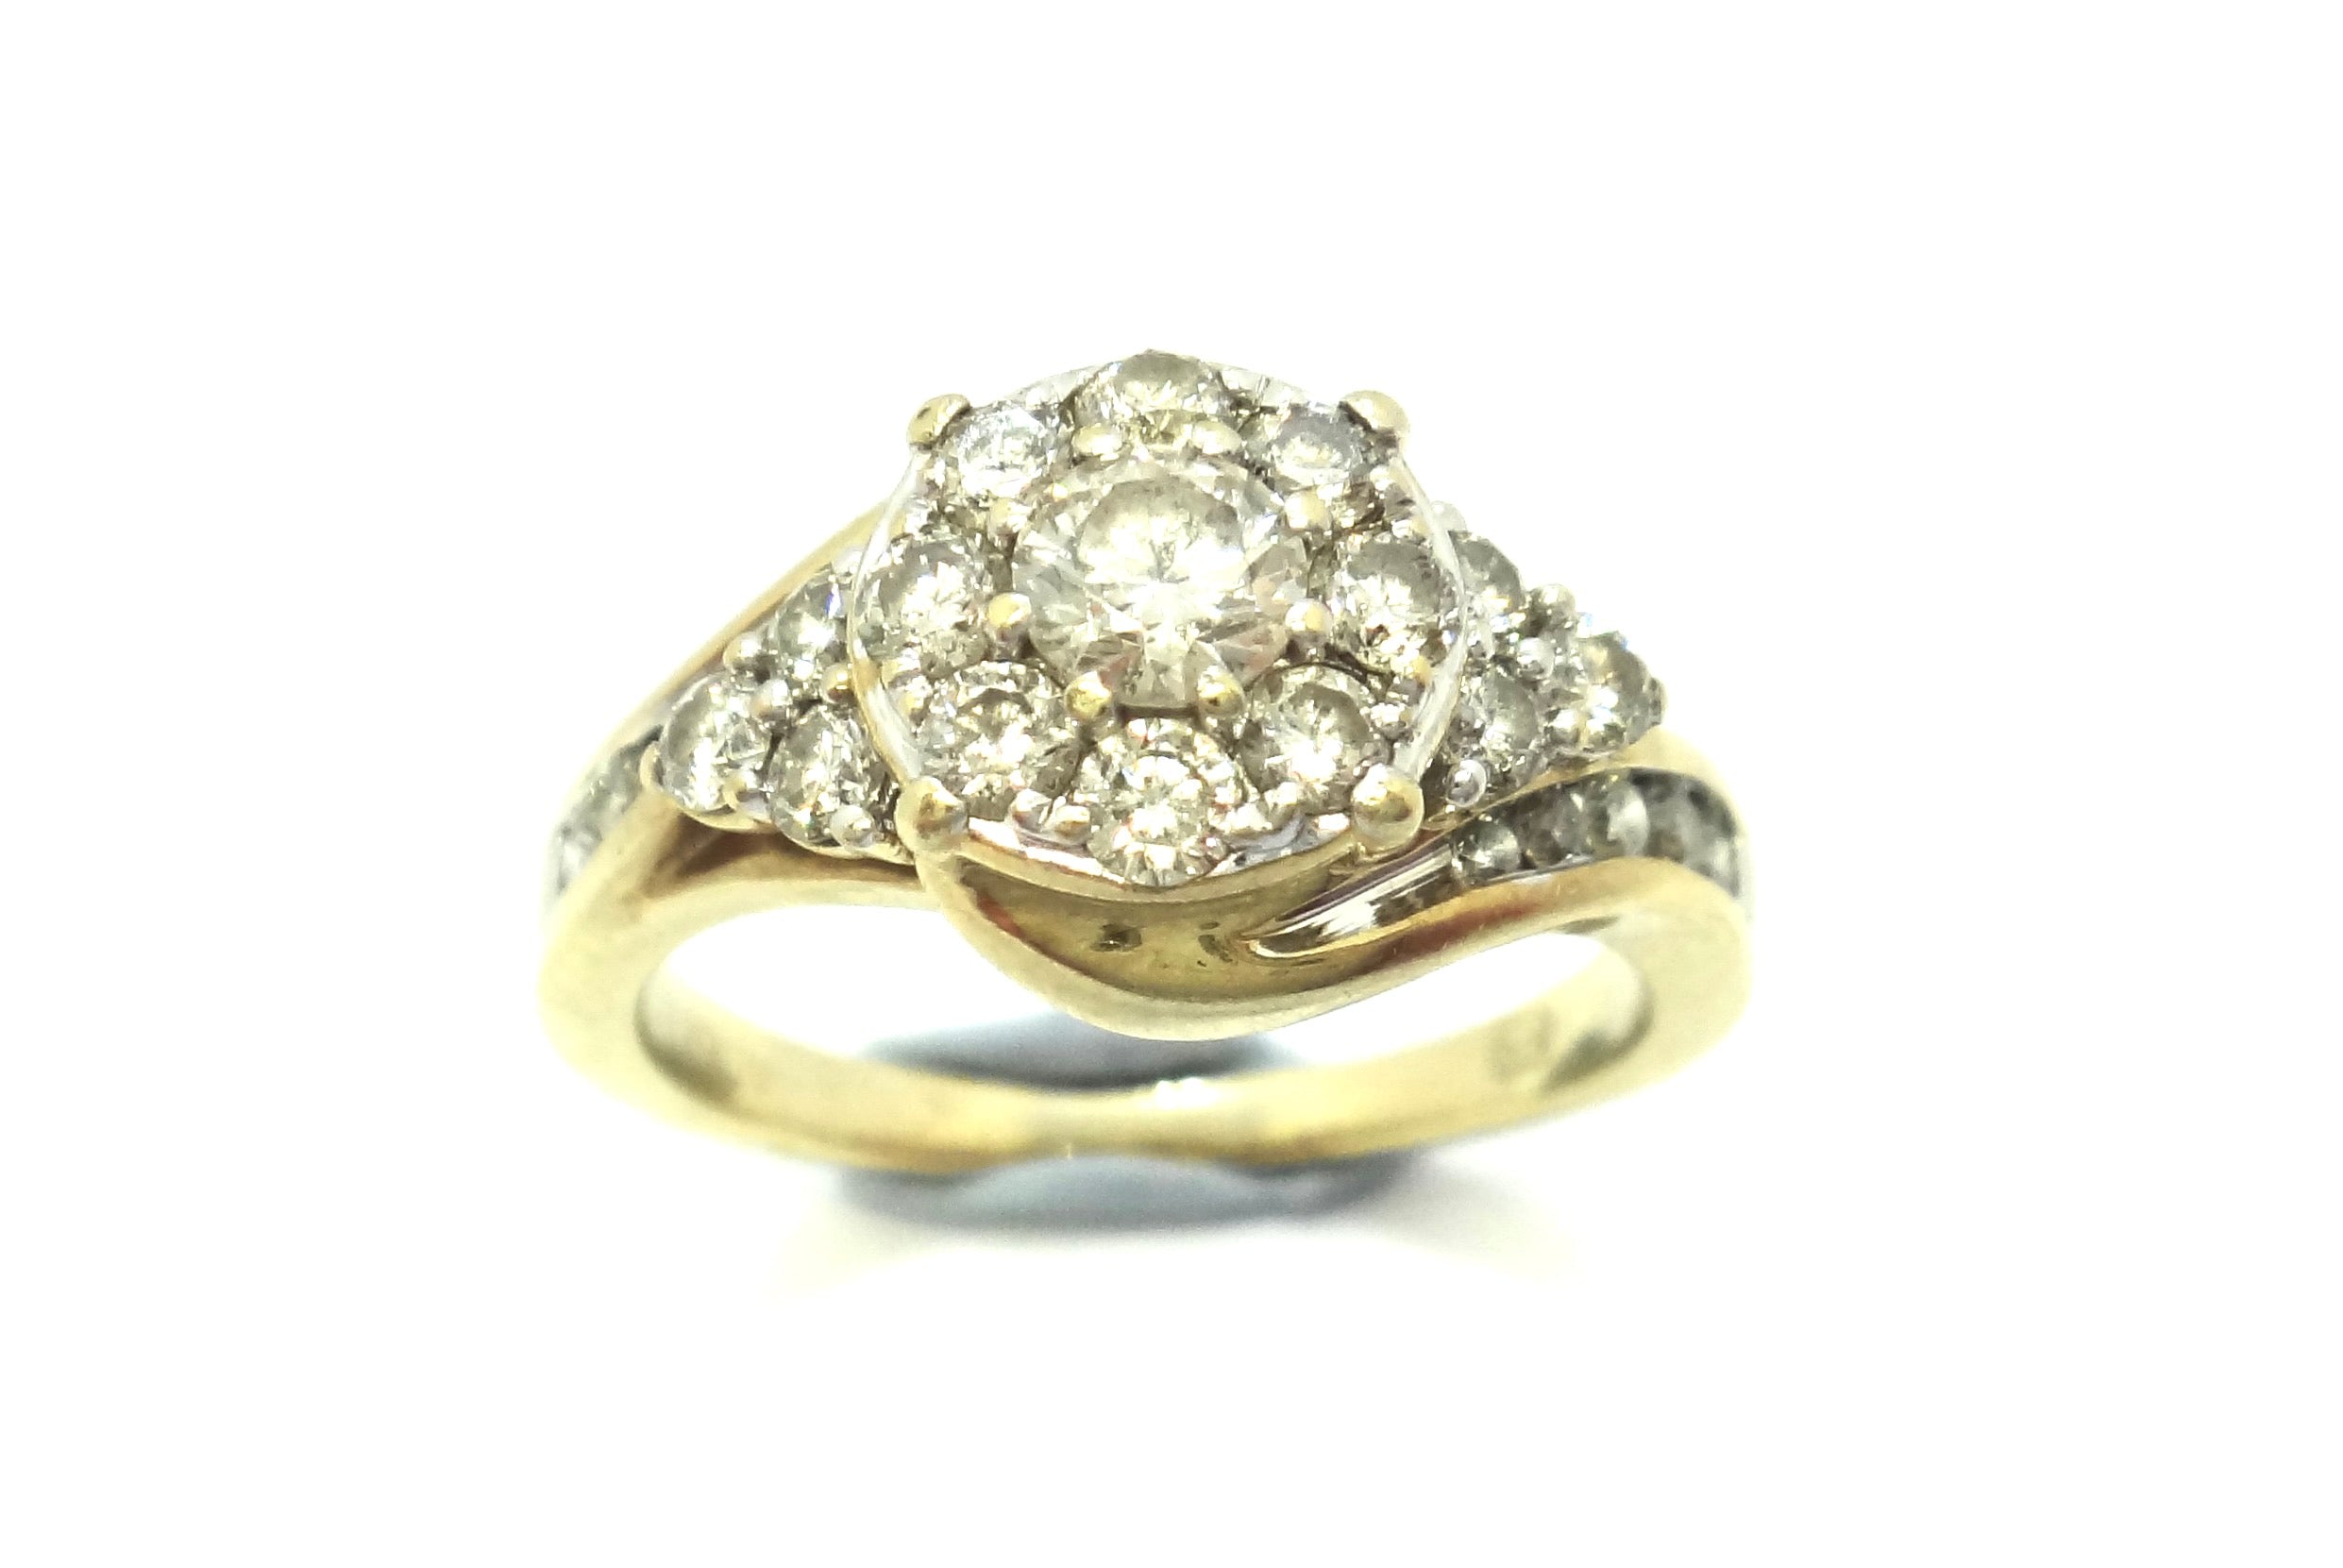 9ct Yellow Gold & Diamond Cluster Ring, VAL $3,275